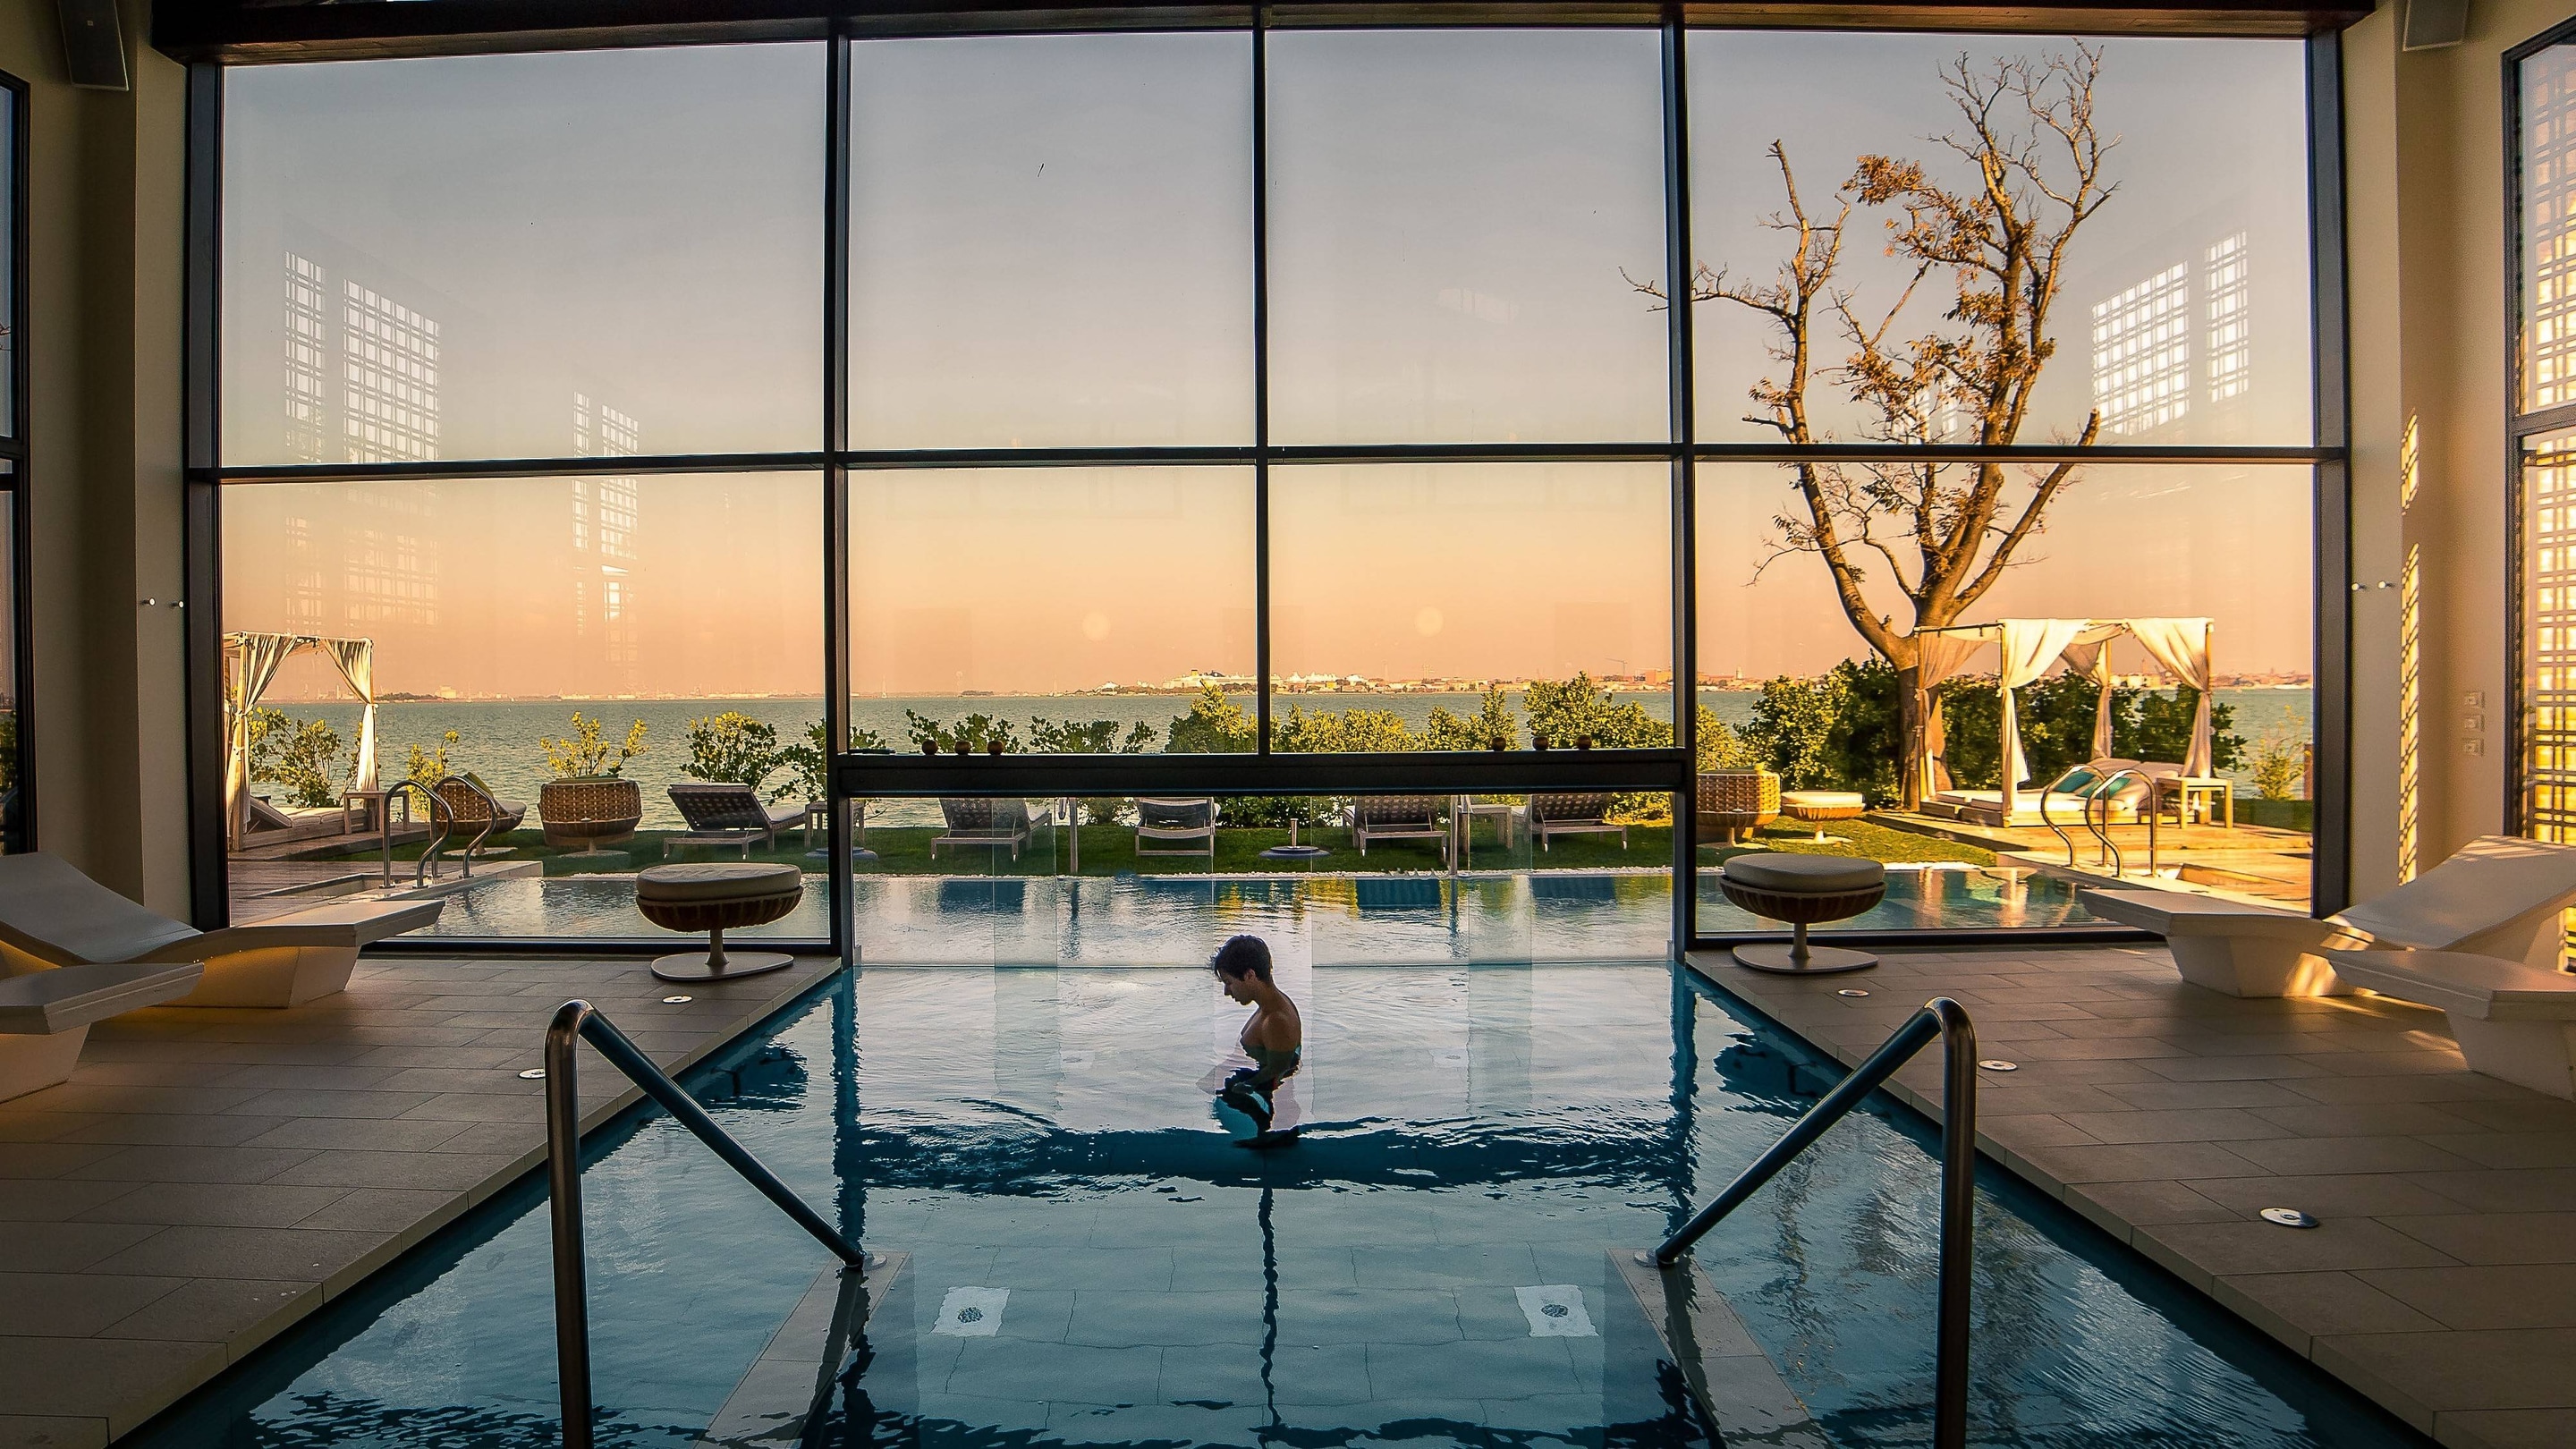 Indoor pool with large floor to ceiling windows showing sunset.